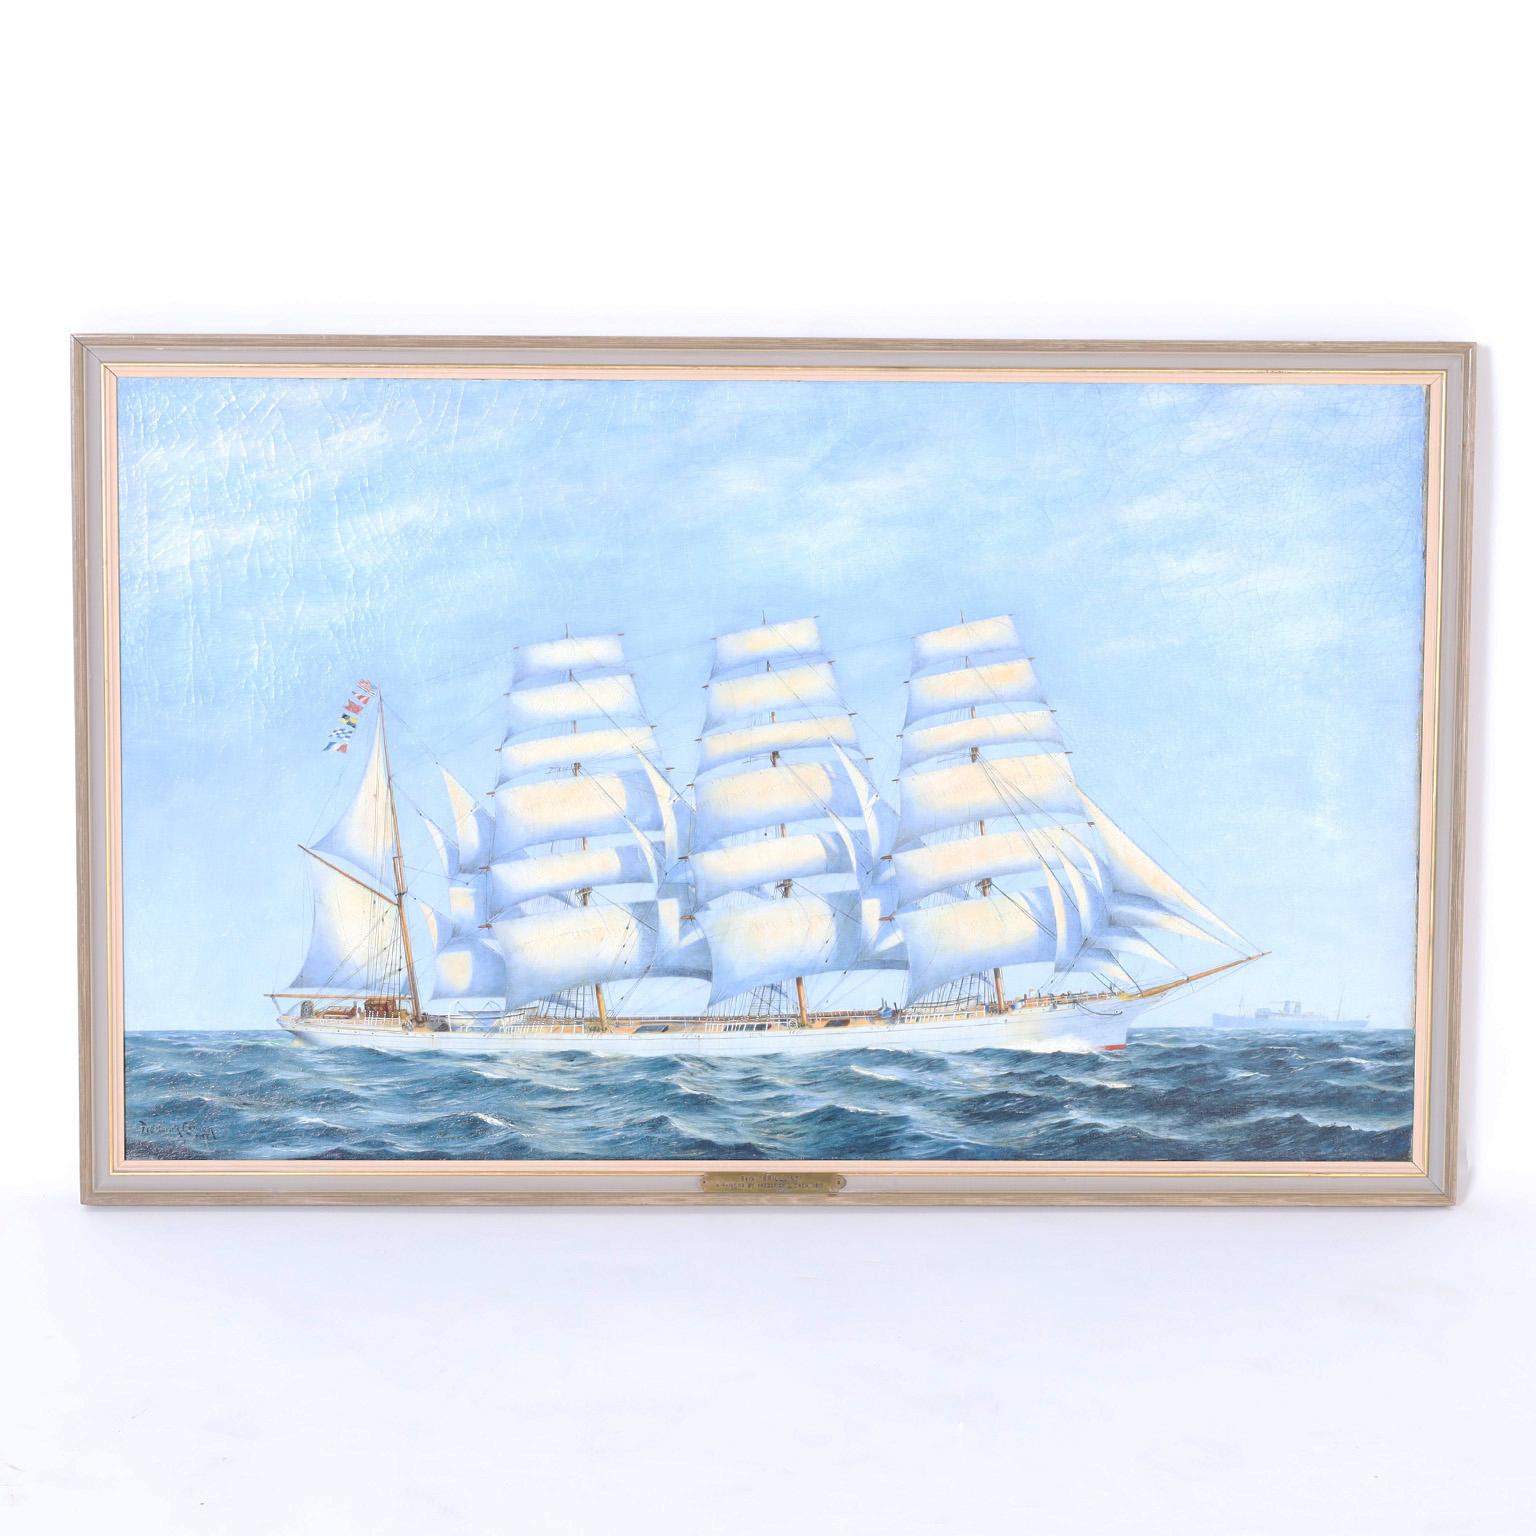 Striking oil painting on canvas of an American four mast sailing ship, in all its glory, in ocean waters with a stem ship in the horizon. Signed by noted marine artist Frederick L.Owen, titled "Brilliant" and presented in a wood frame.